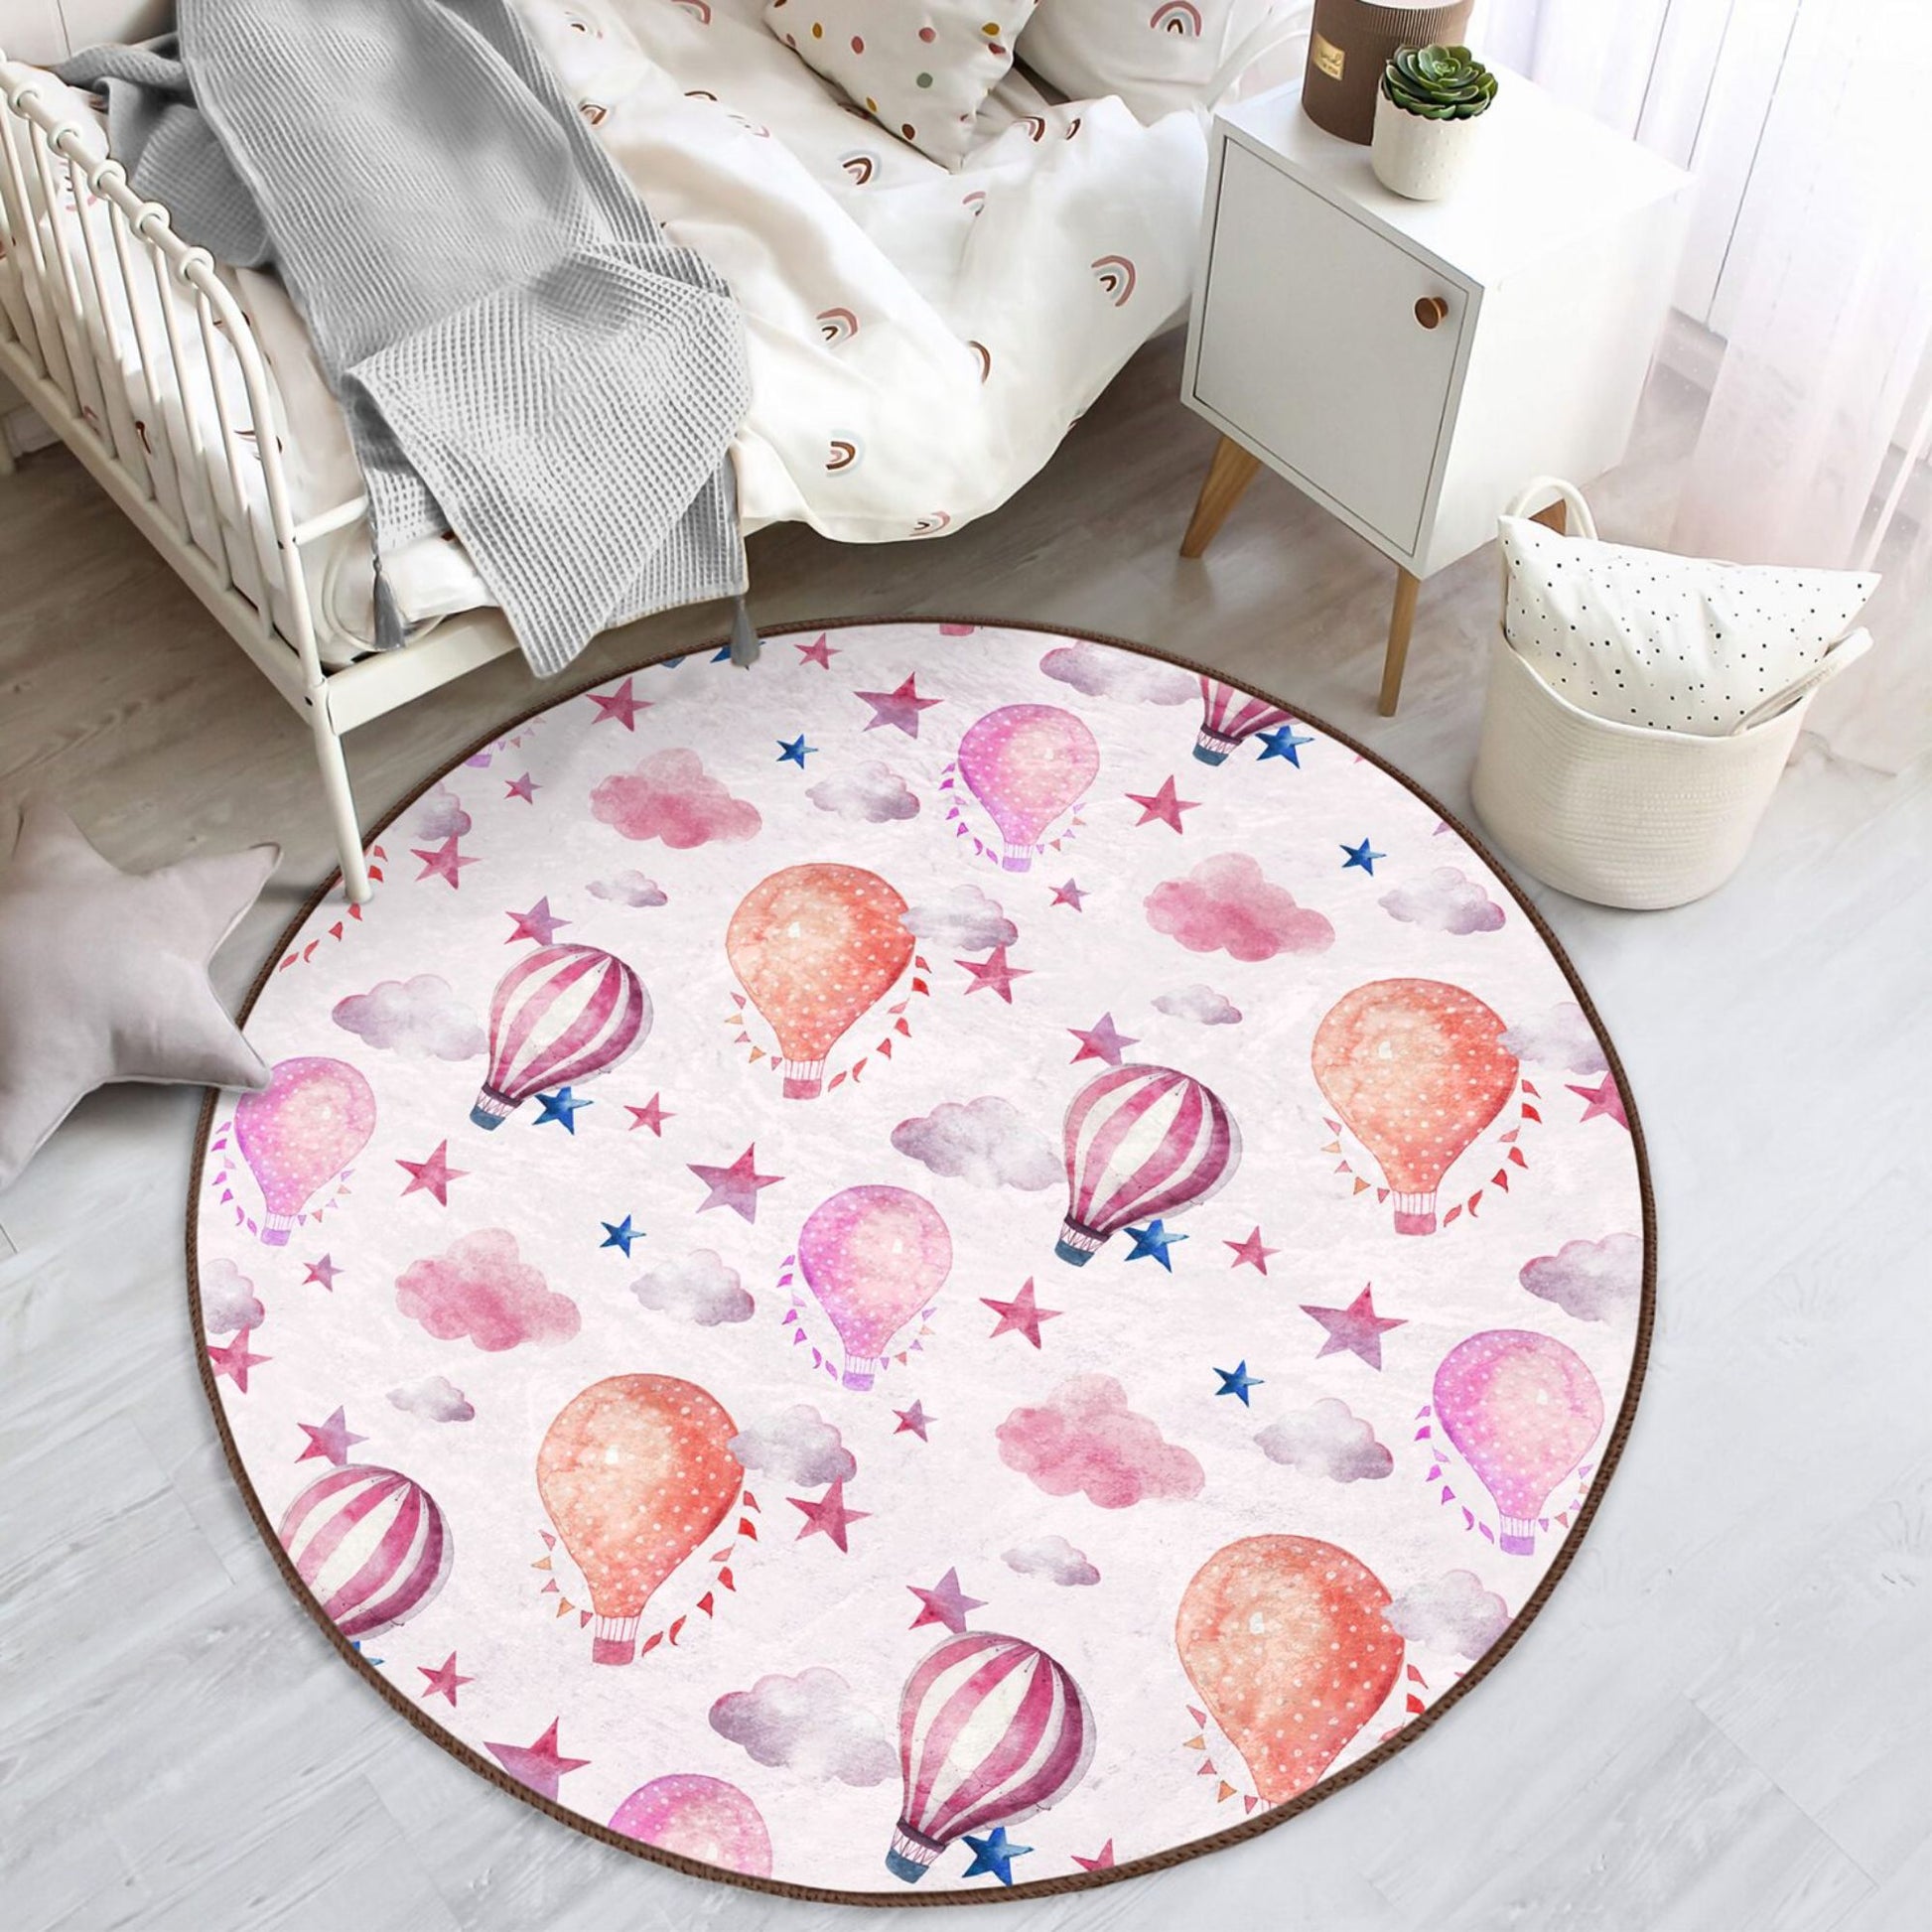 Soft & Durable Homeezone Rug - Perfect for Playrooms